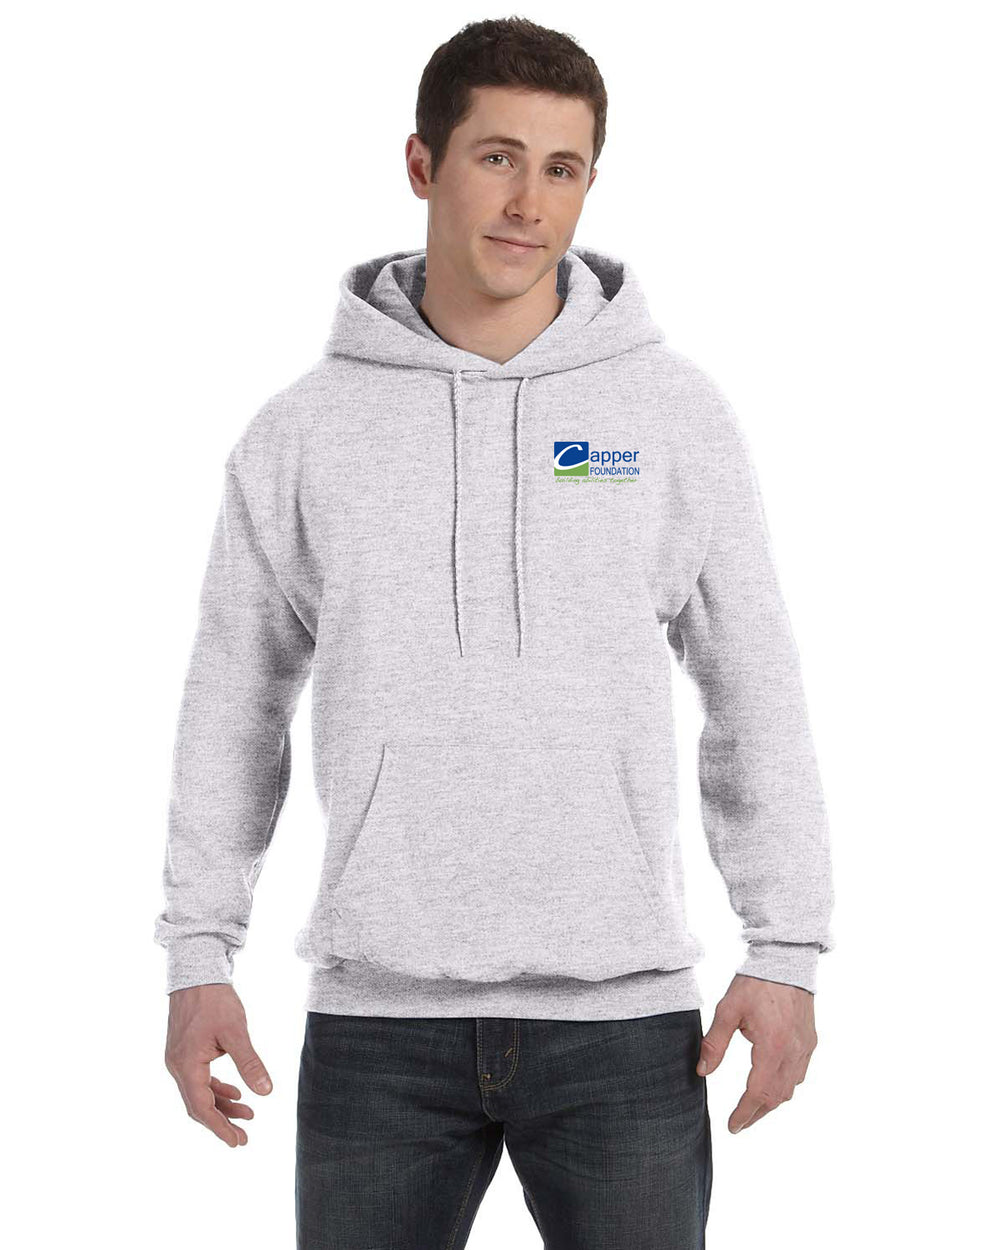 Capper Foundation CC - Adult 7.8 oz. 50/50 Pullover Hoodie - P170